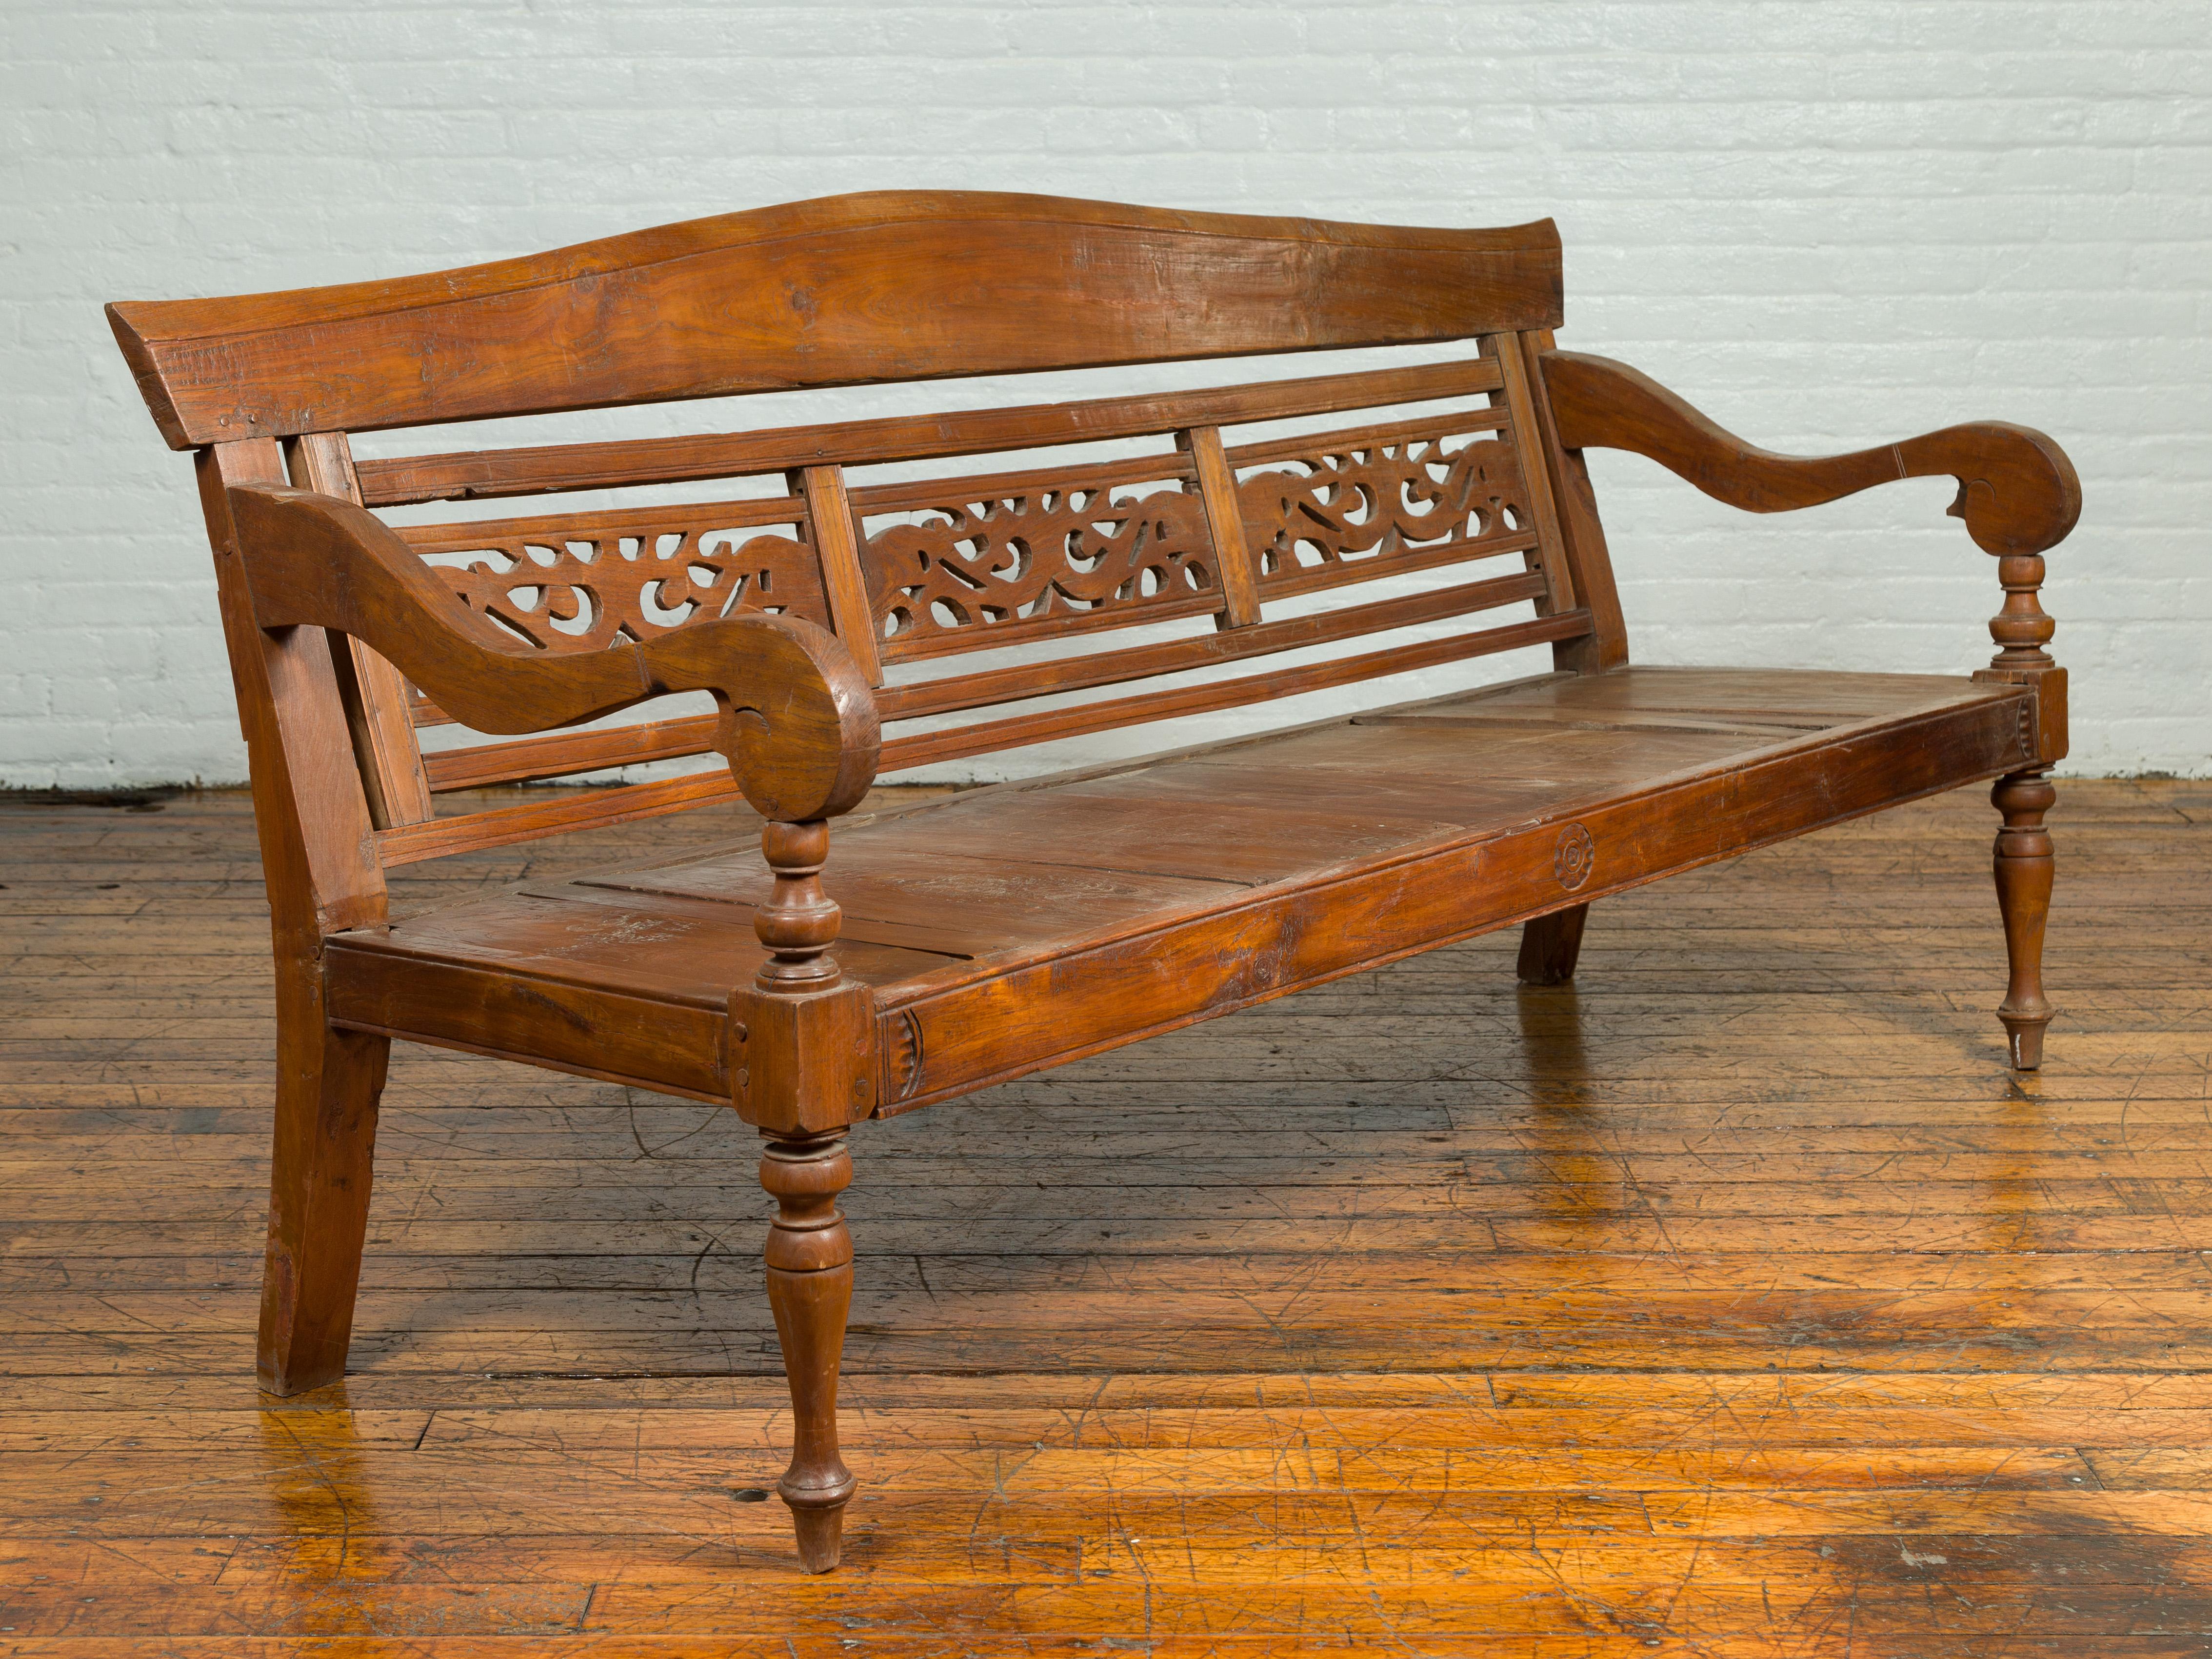 Indonesian Dutch Colonial Antique Wooden Bench with Carved Camelback and Scrolling Arms